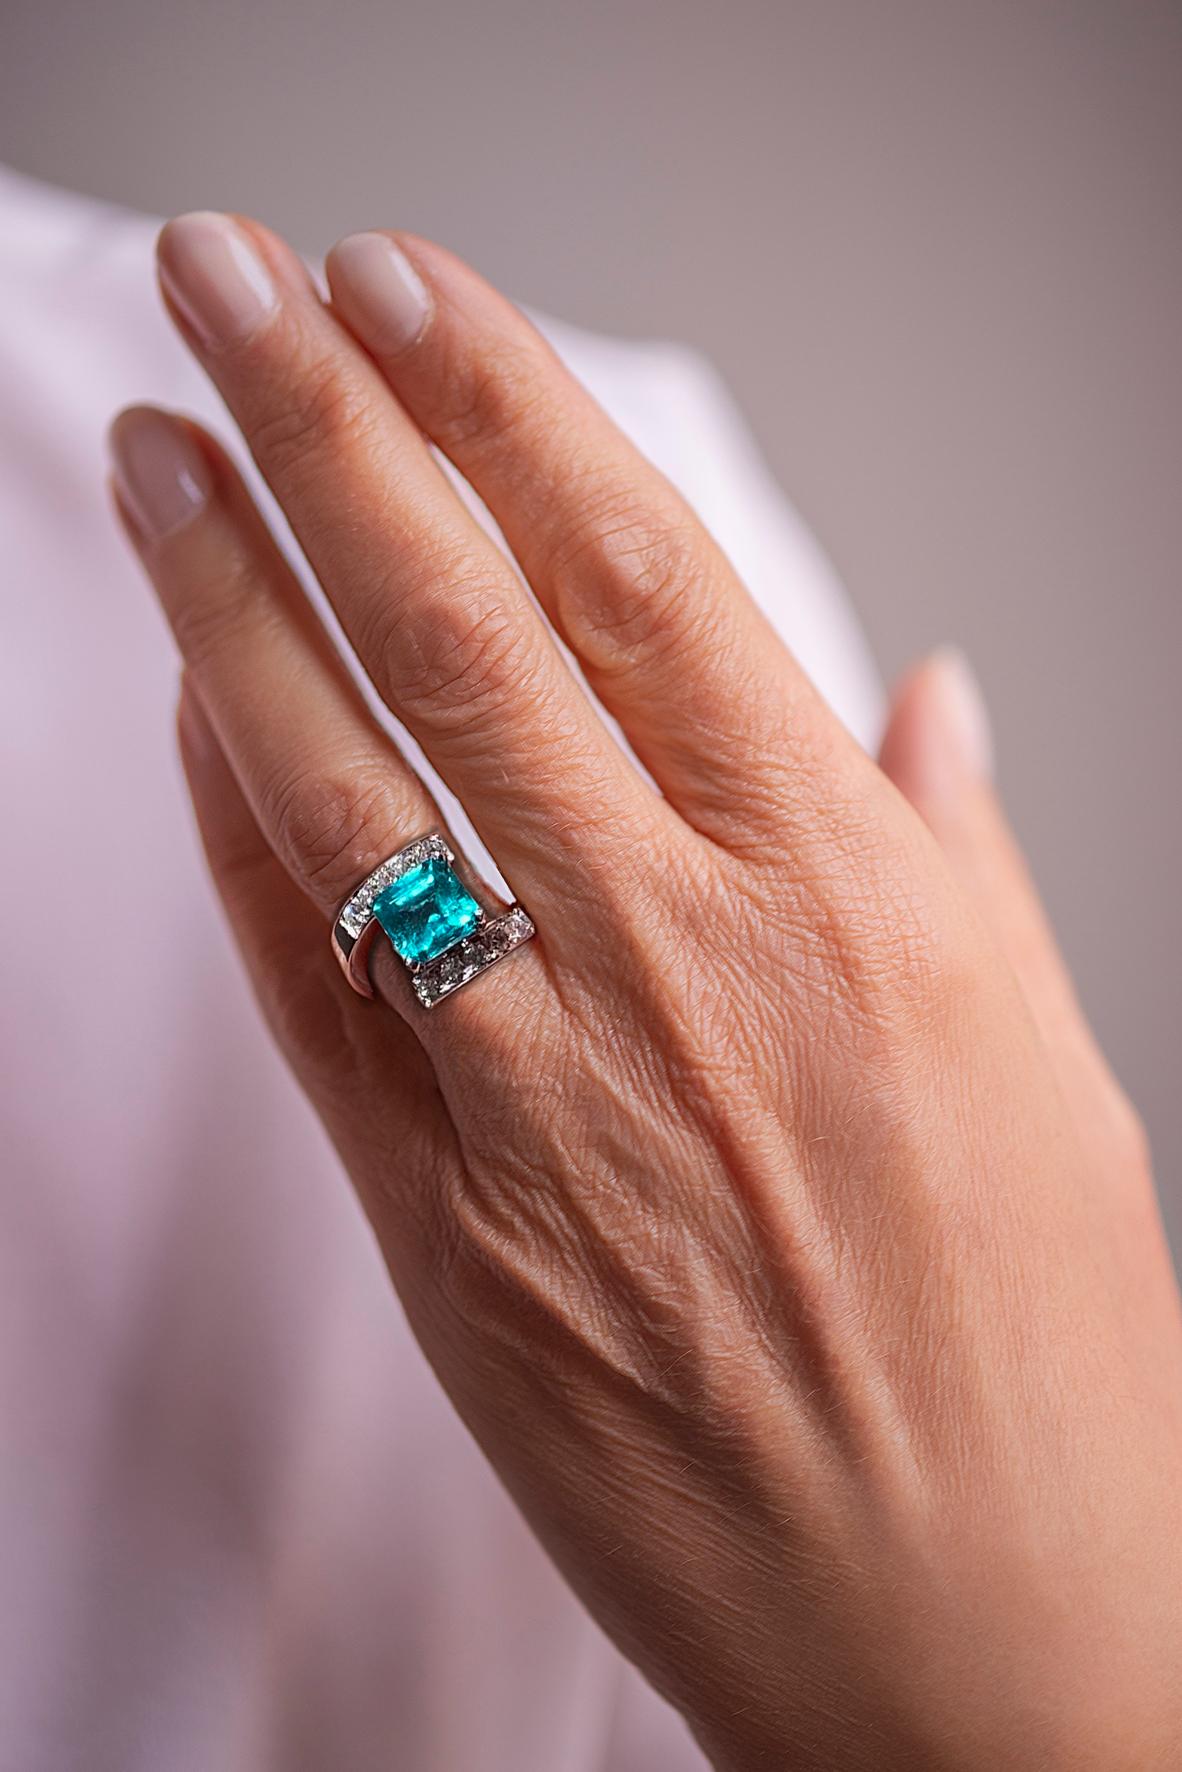 IGN Certified 2.10 Carat Emerald 18 Carat 0.56 Carat White Diamonds 18K White Gold Ring.
A timeless Design Ring Handcrafted in 18 Karats White Gold by expert artisans and embellished with a Green Emerald and White Diamonds. A ring to make every